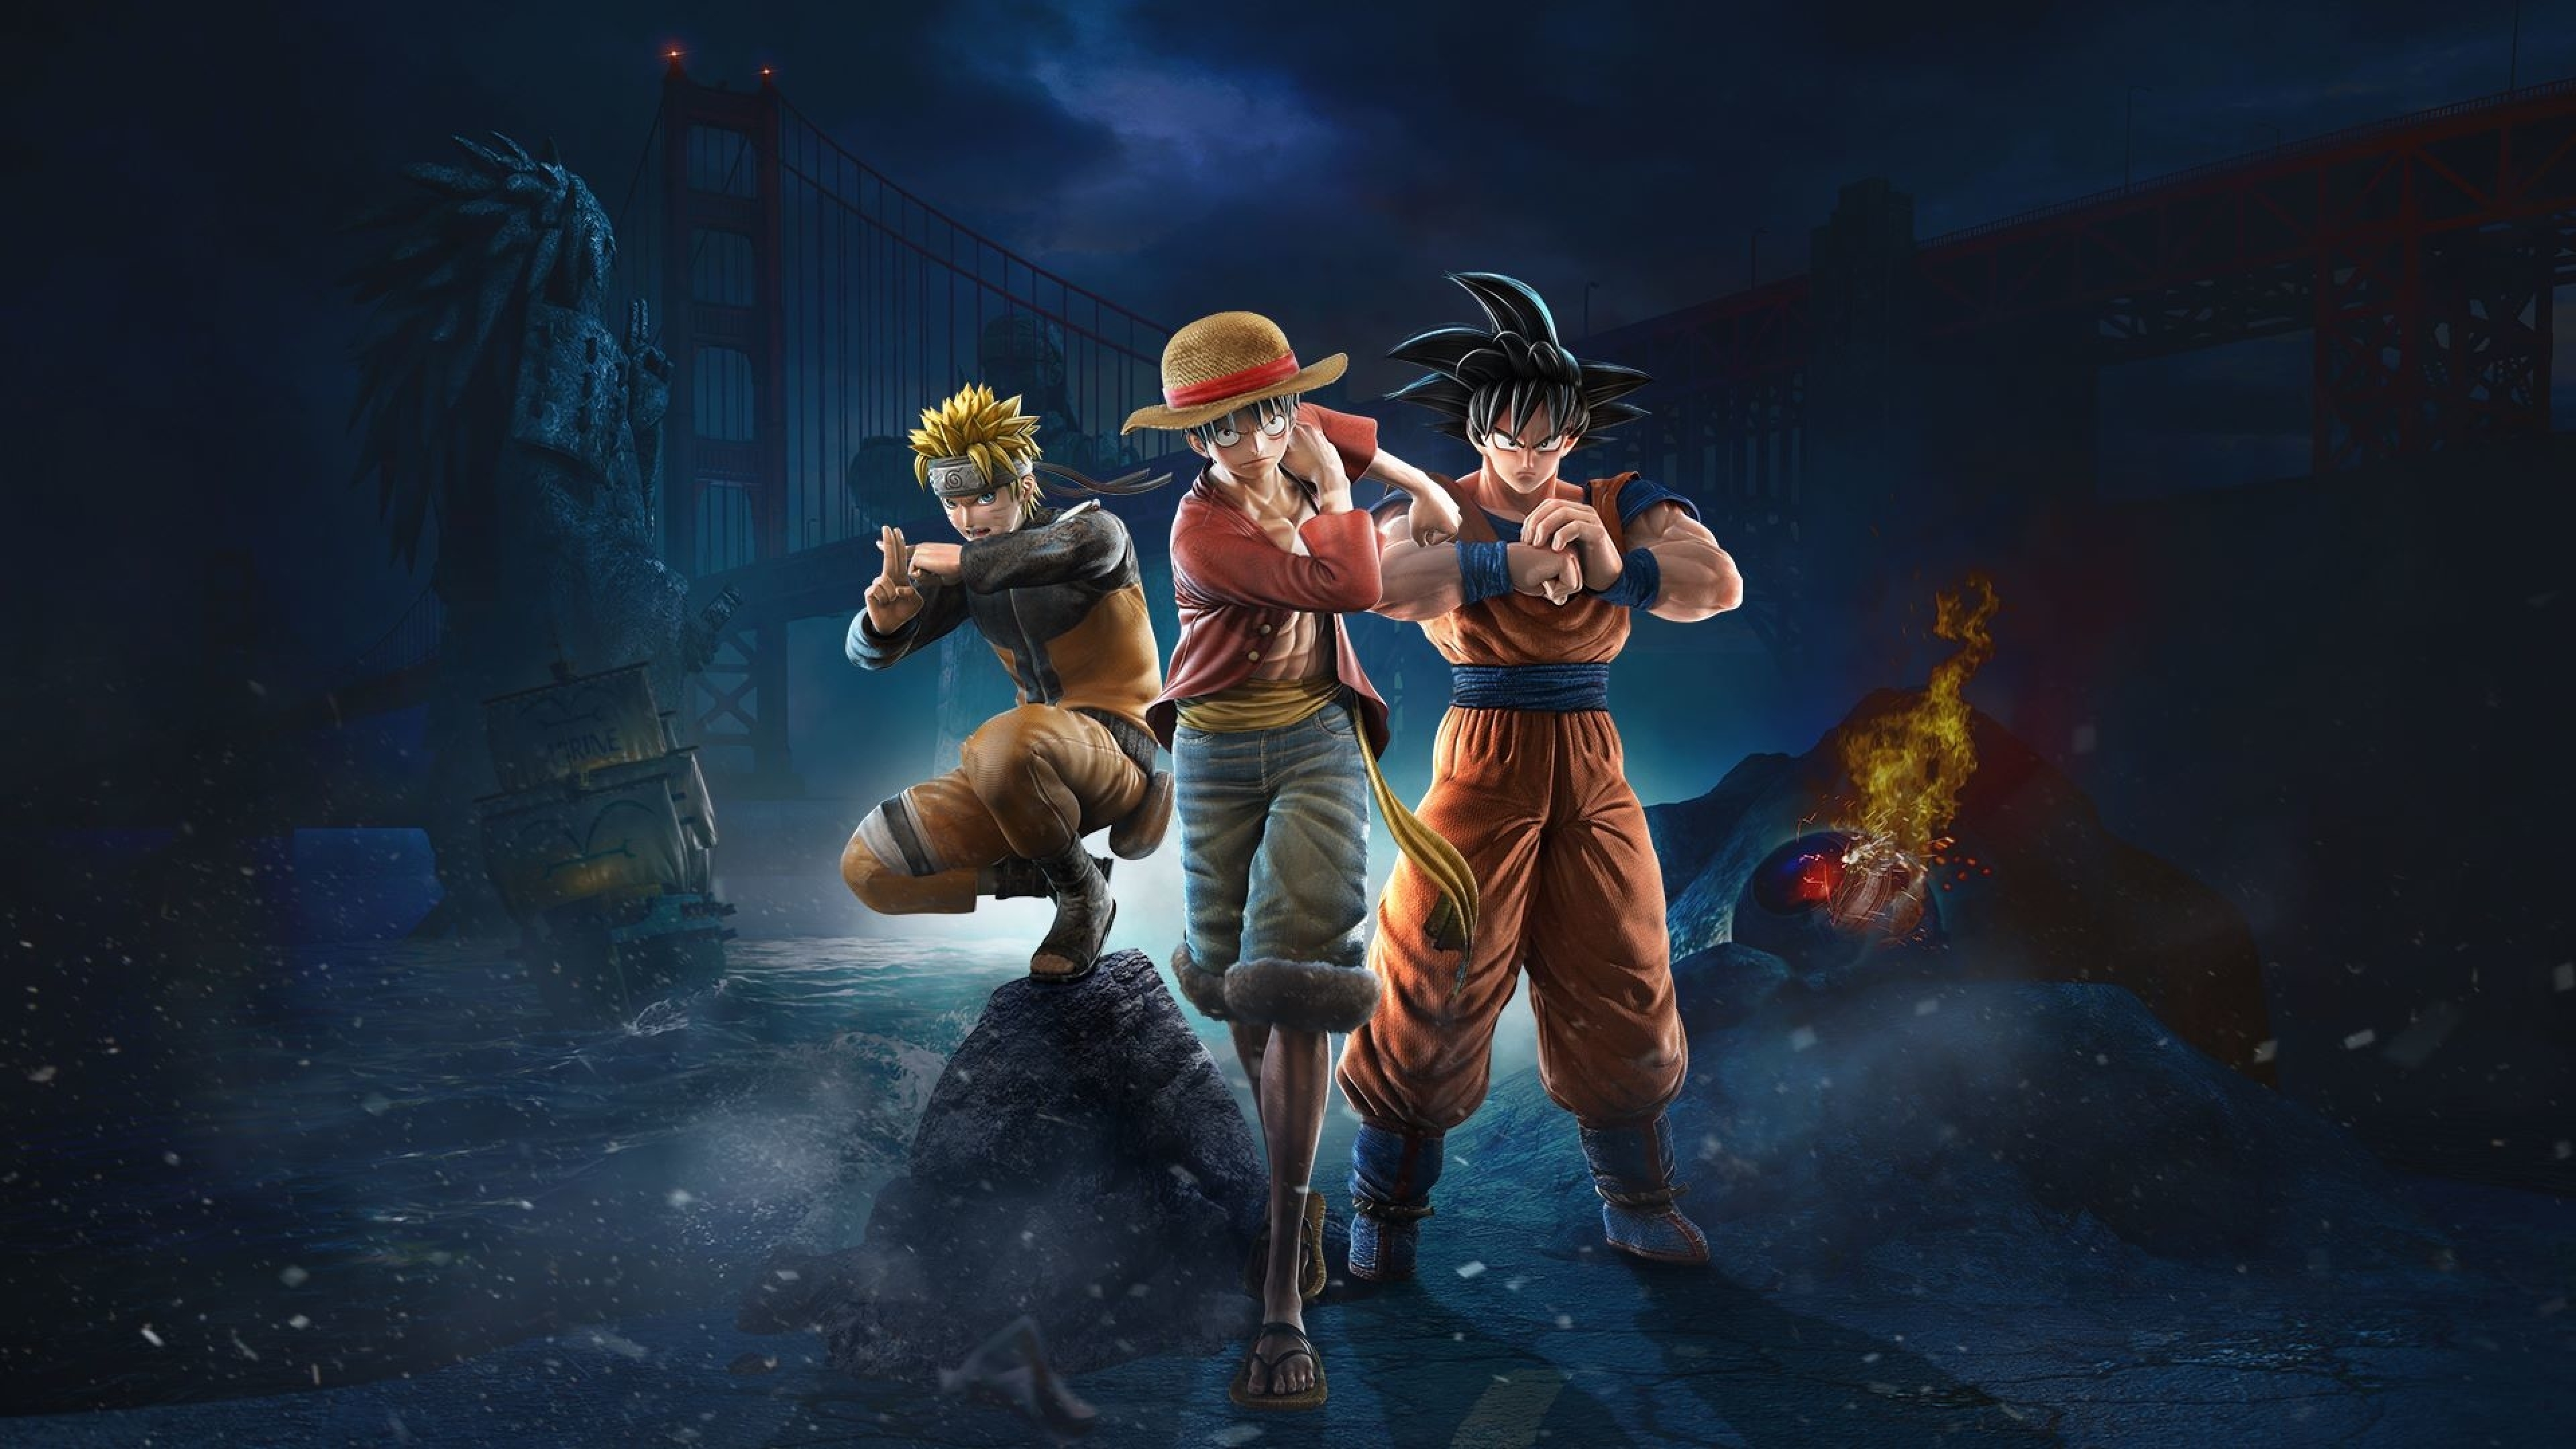 3840x2160 Jump Force 2019 4k Wallpaper Hd Games 4k Wallpapers Images